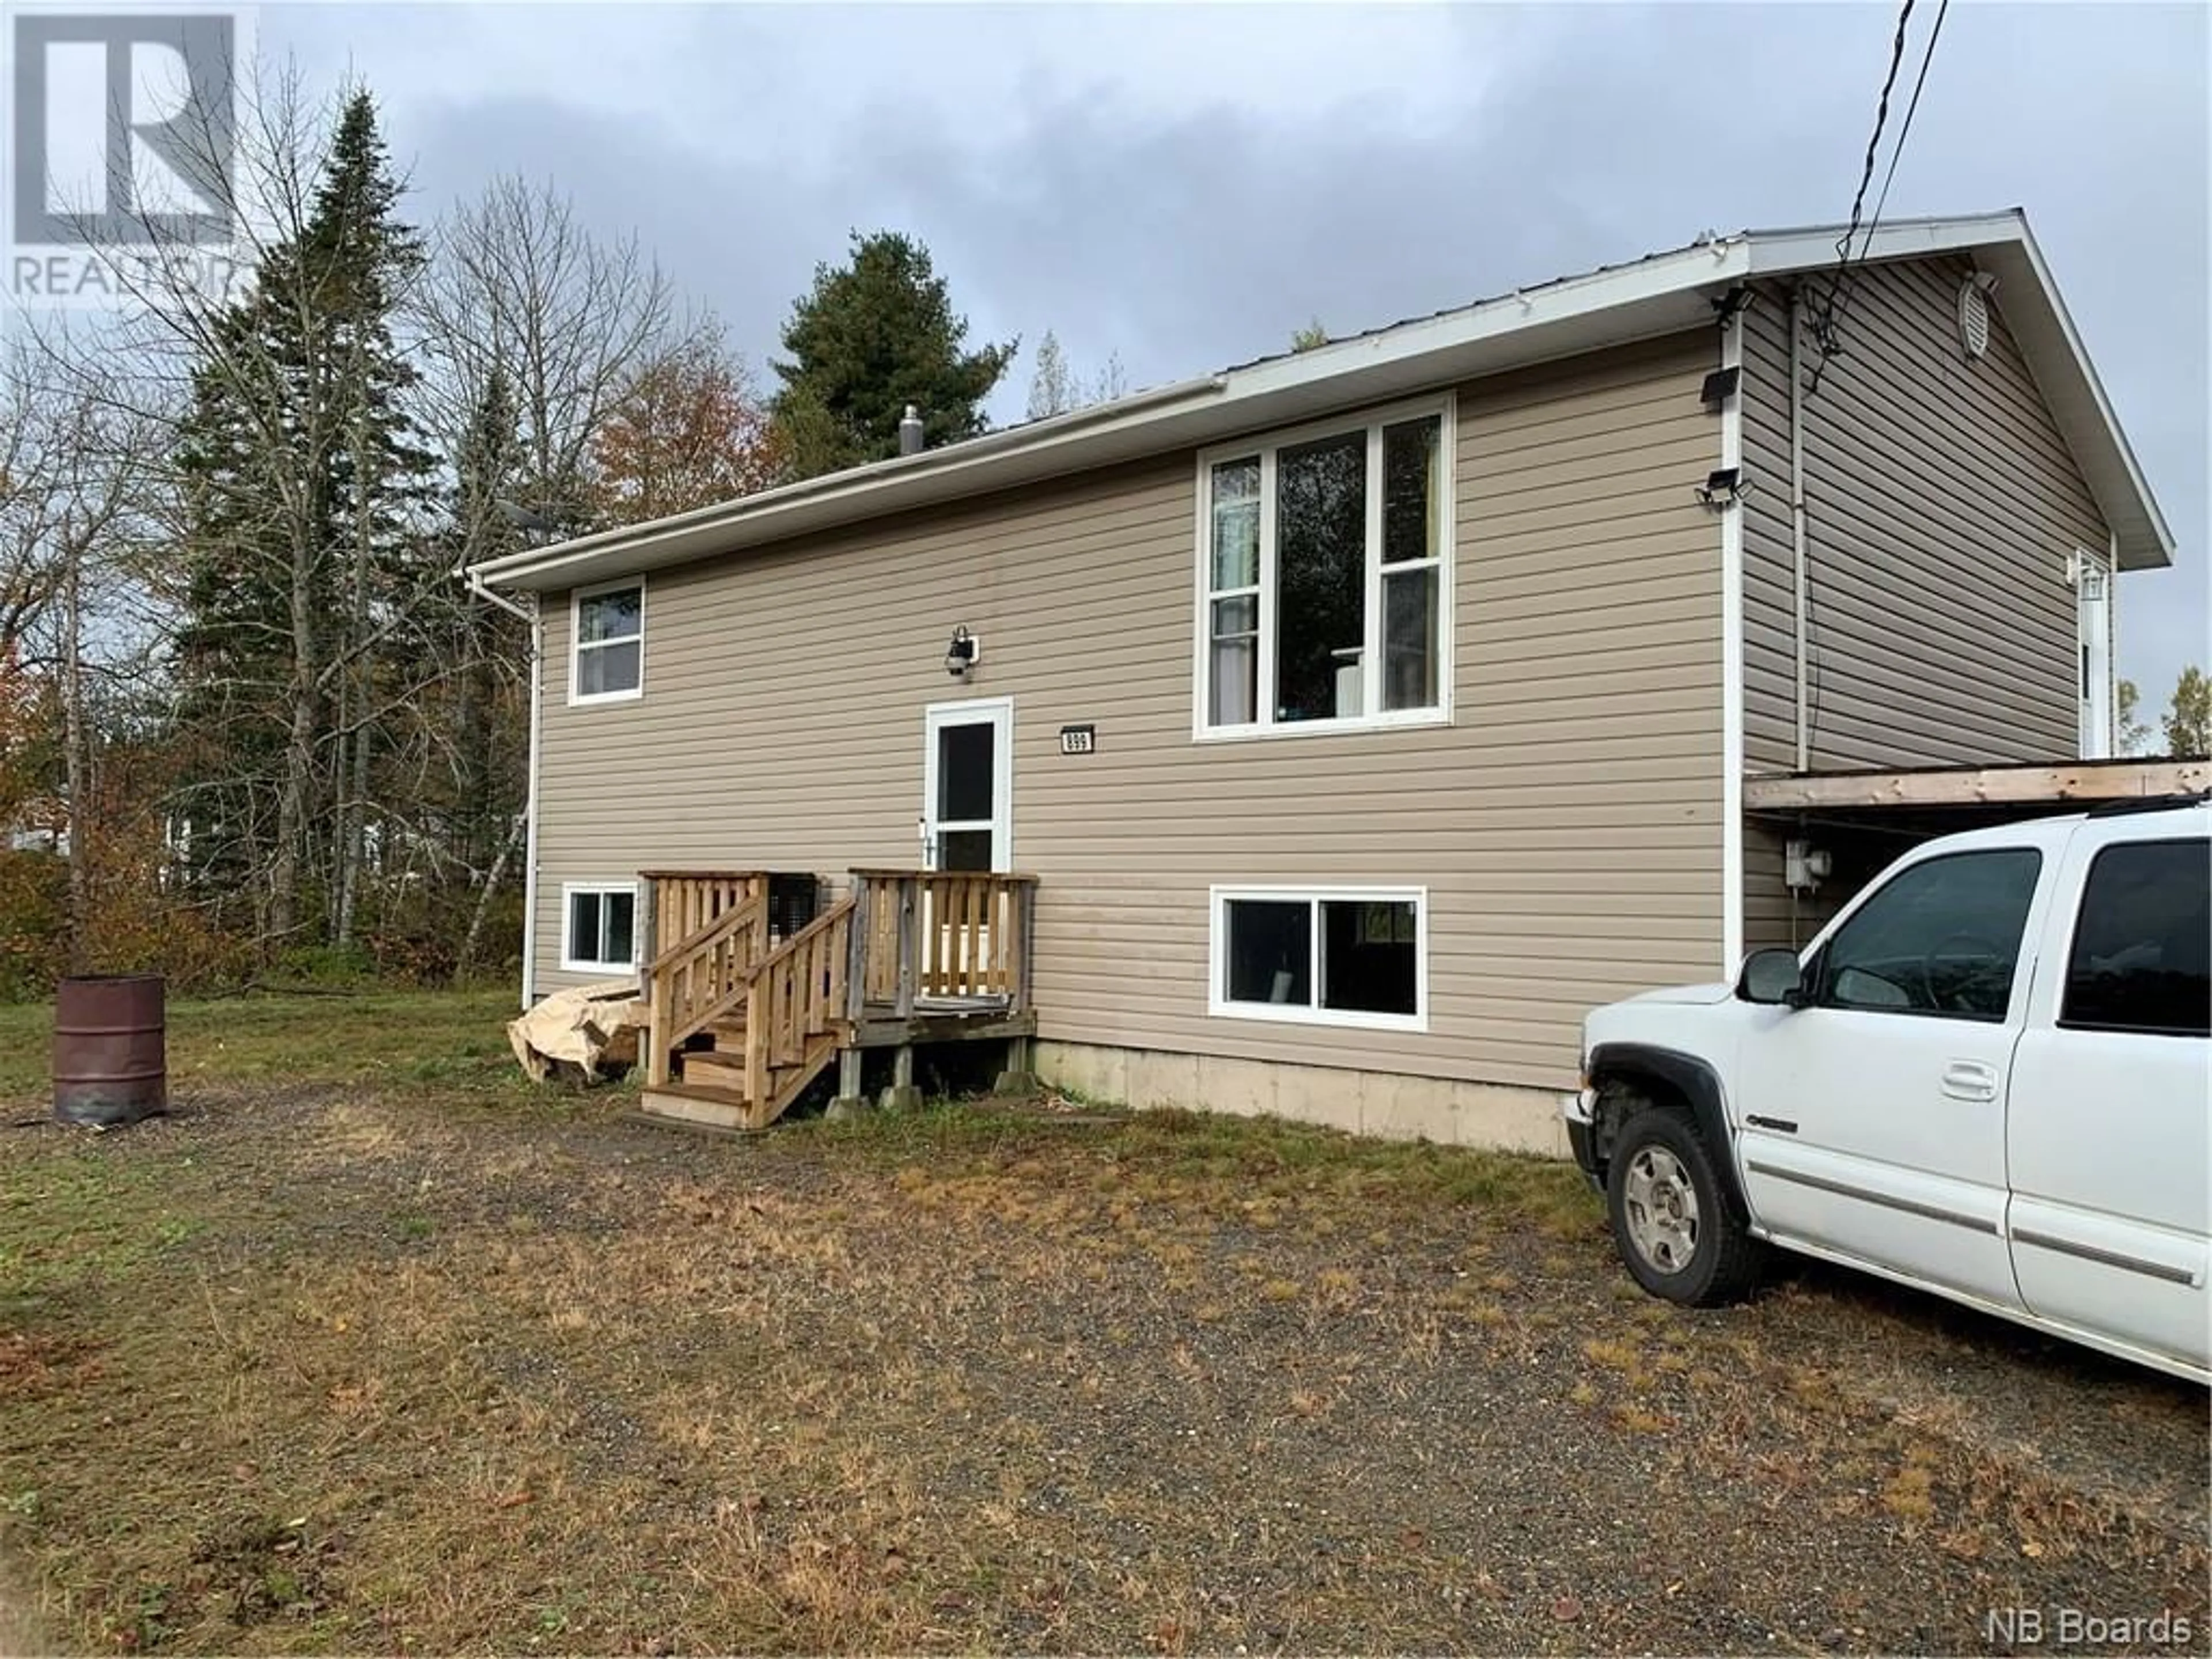 Home with unknown exterior material for 899 Route 760, Rollingdam New Brunswick E5A2X2